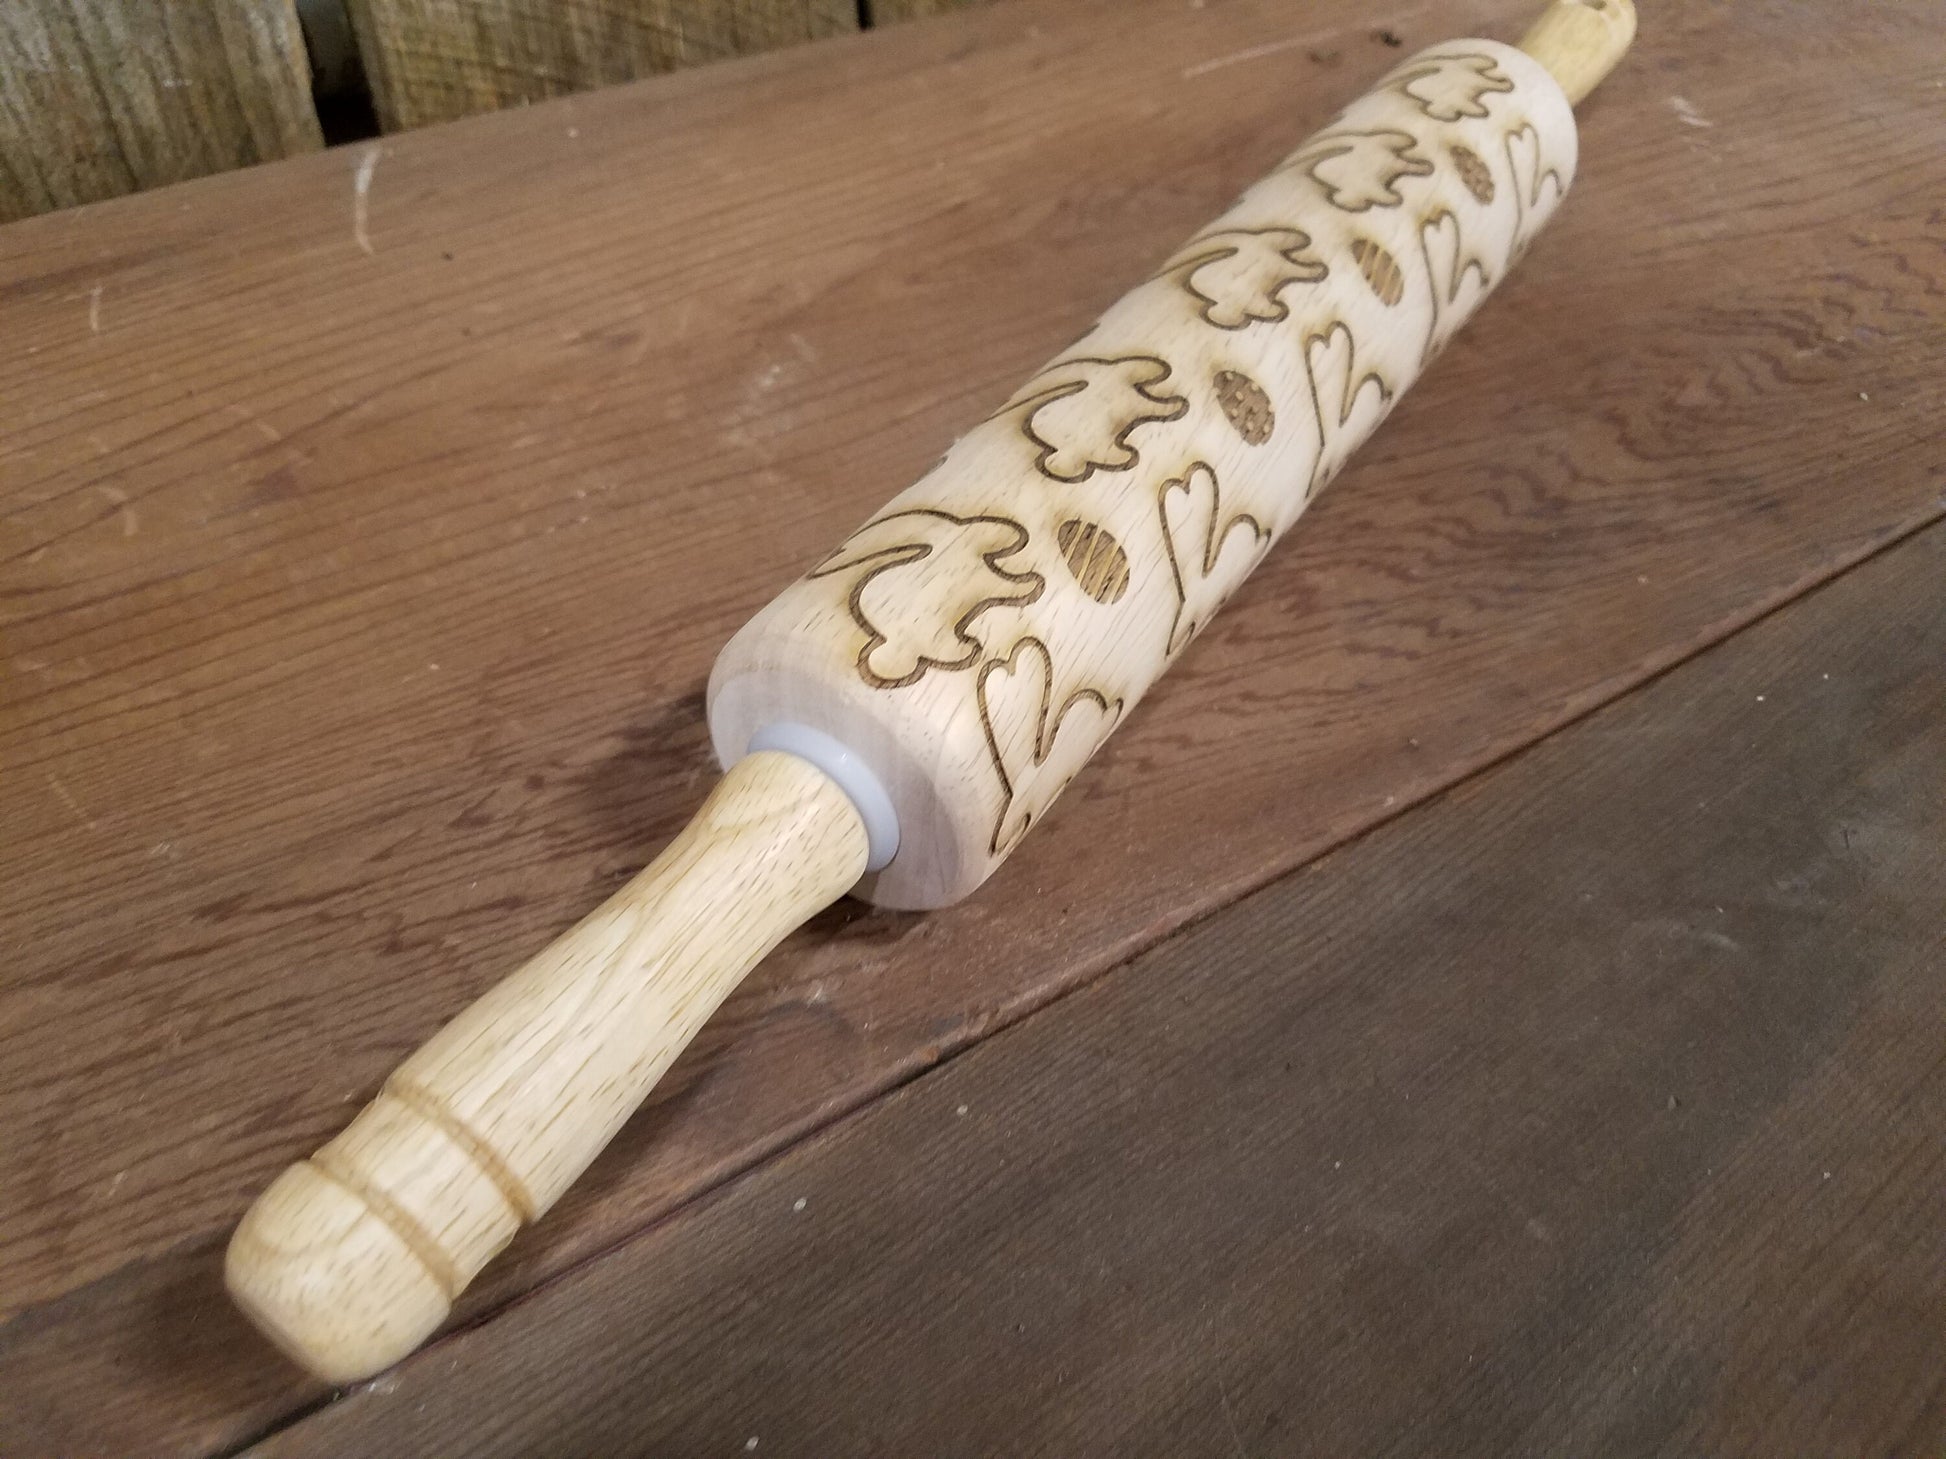 Easter, Spring, Rabbit, Bunny, Decorated Egg, 10 Inch Rolling Pin, Crust, Gift, Engraved, Wood, Cookie Stamp, Laser, pottery texture